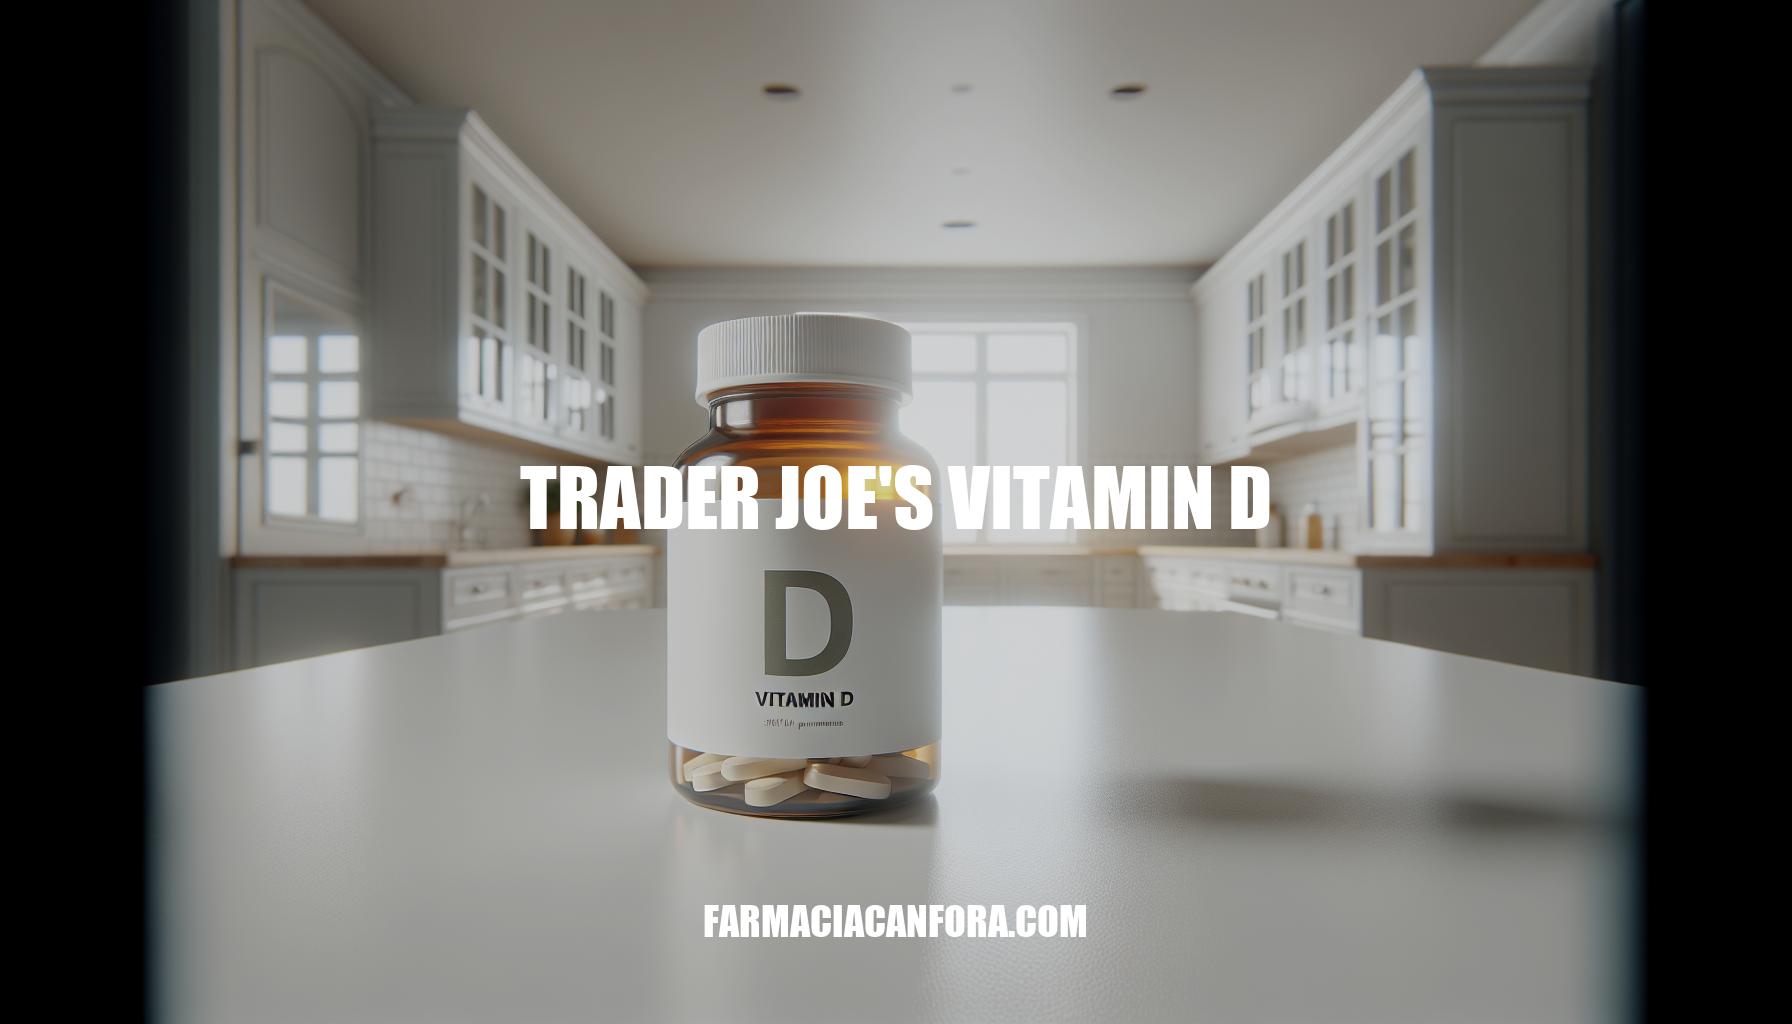 Trader Joe's Vitamin D Supplements: Essential for Health and Wellness